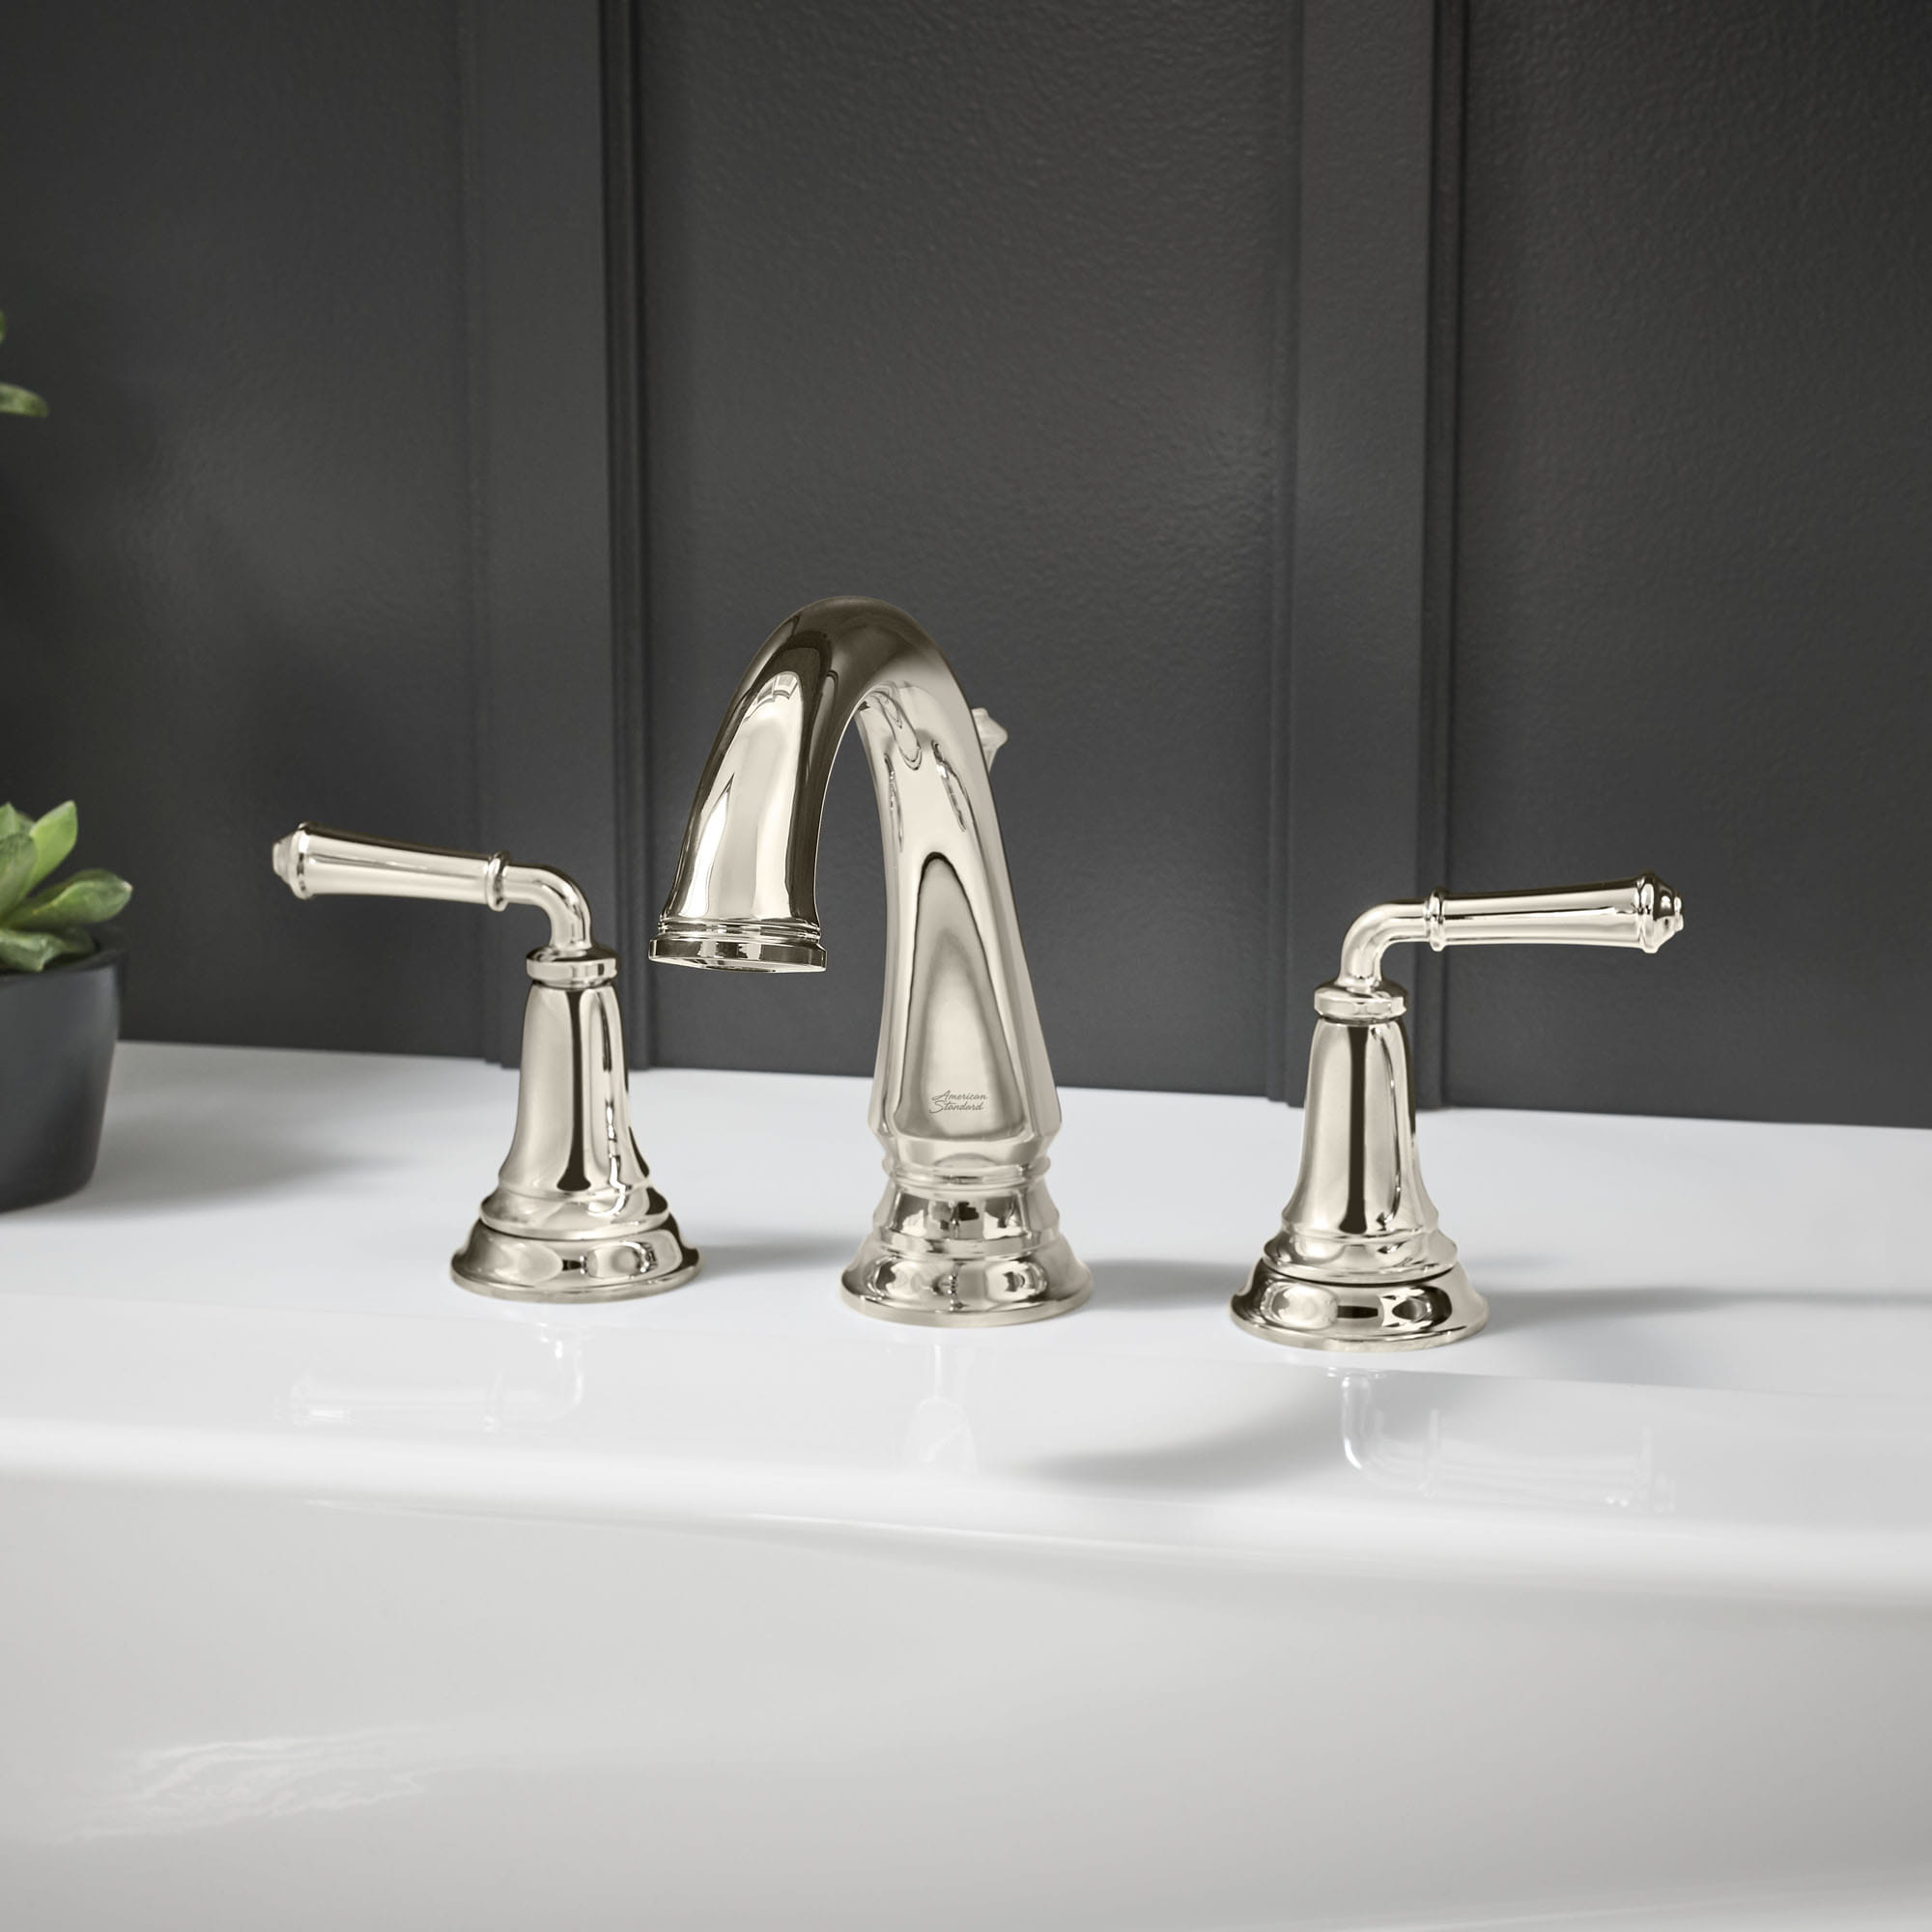 Delancey® Bathtub Faucet With Lever Handles for Flash® Rough-In Valve